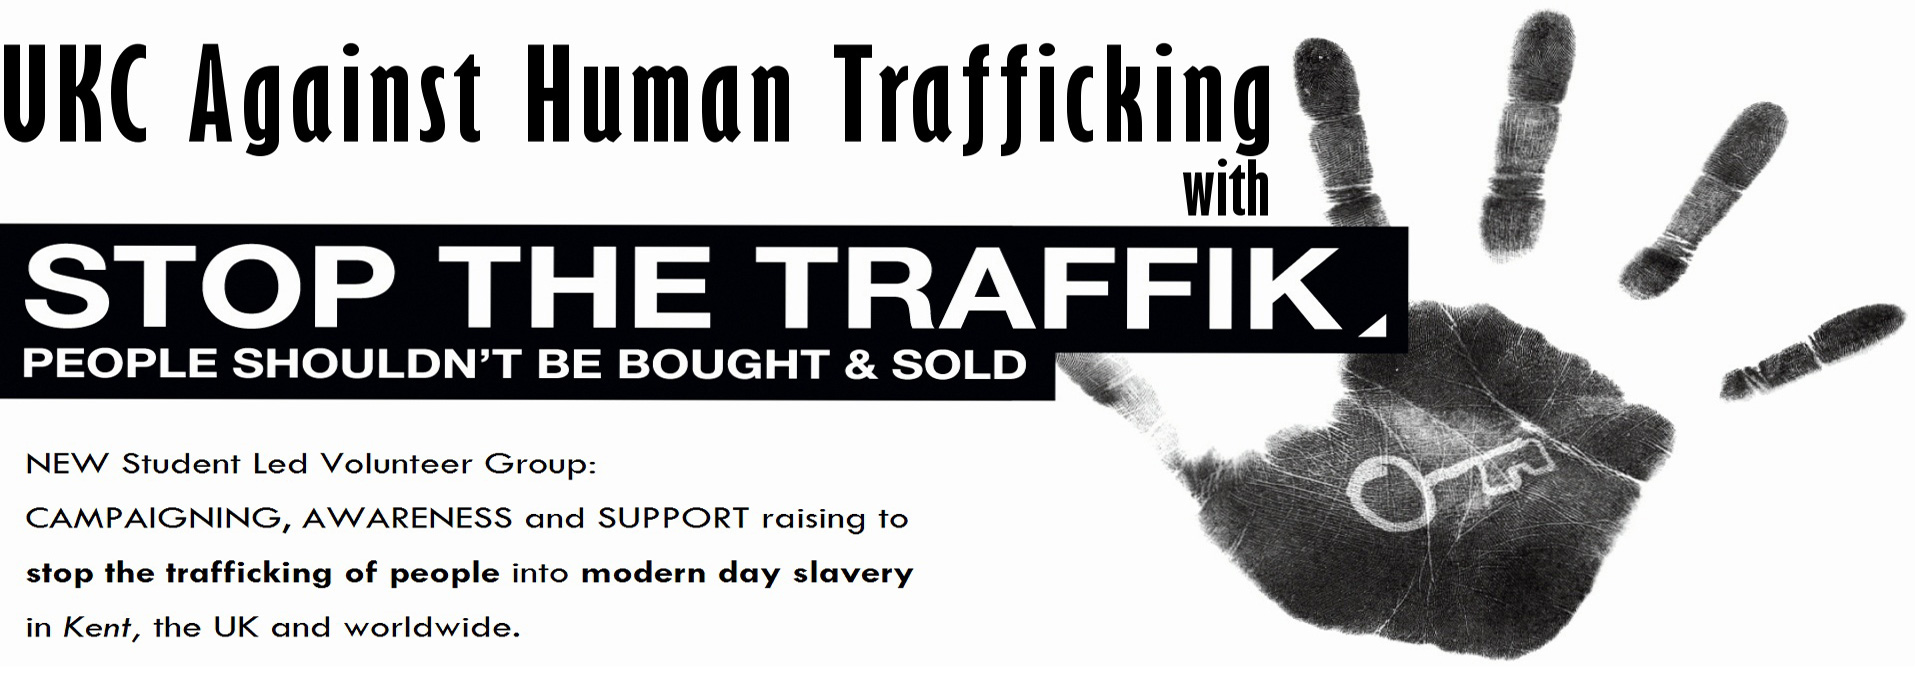 Introducing UKC Against Human Trafficking